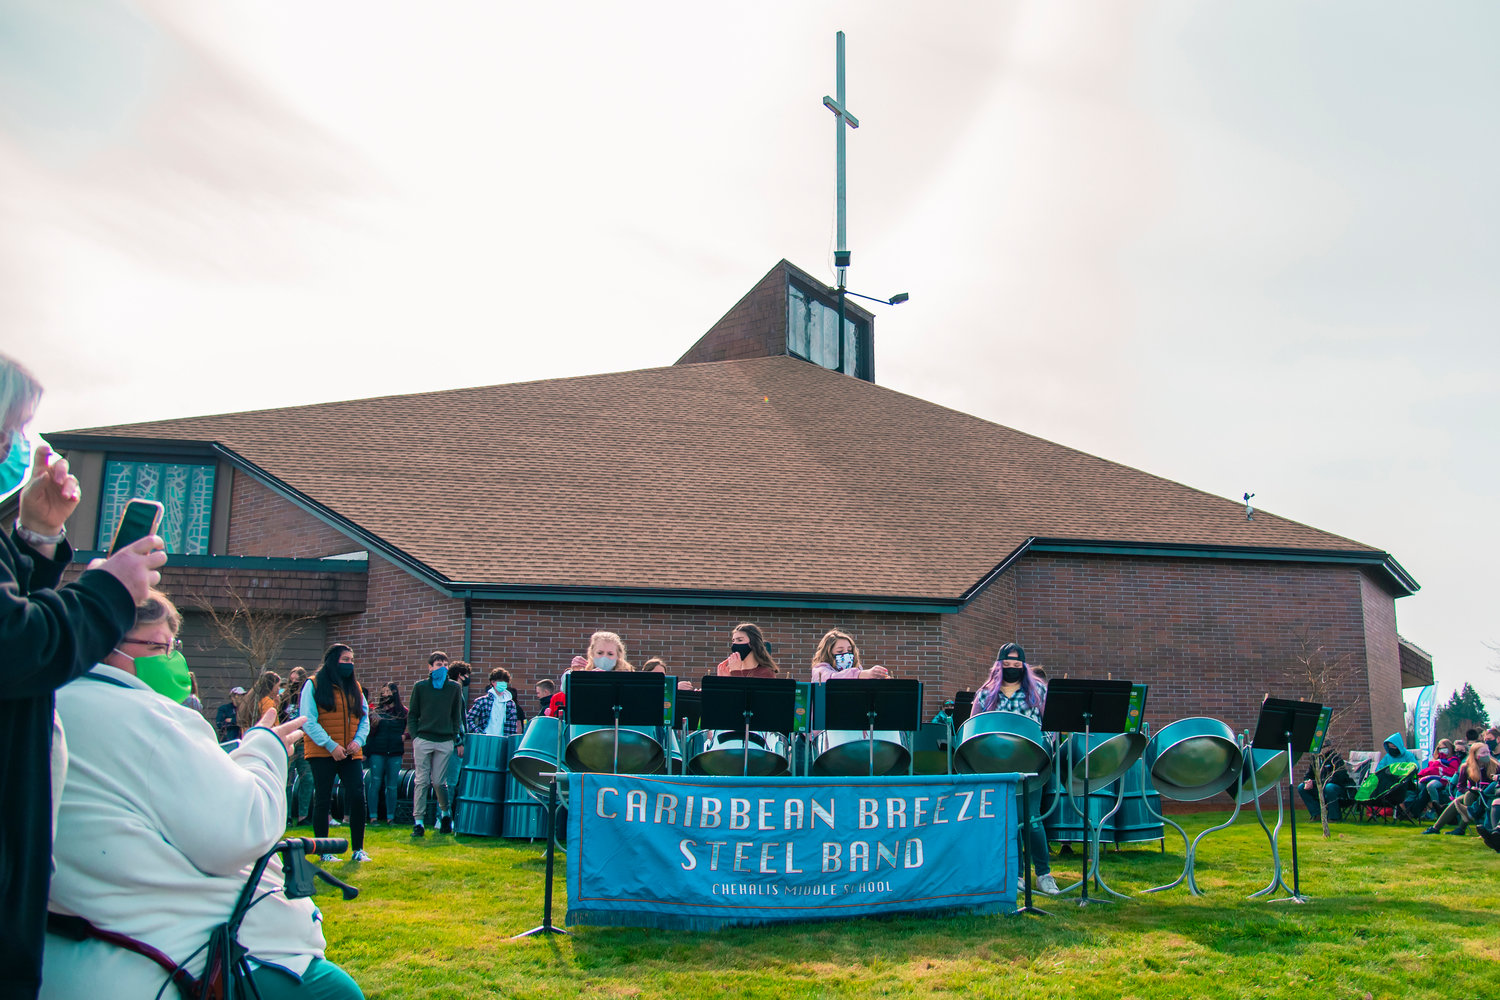 The Caribbean Breeze Steel Band plays at Bethel Church during an Easter event on Saturday in Chehalis.